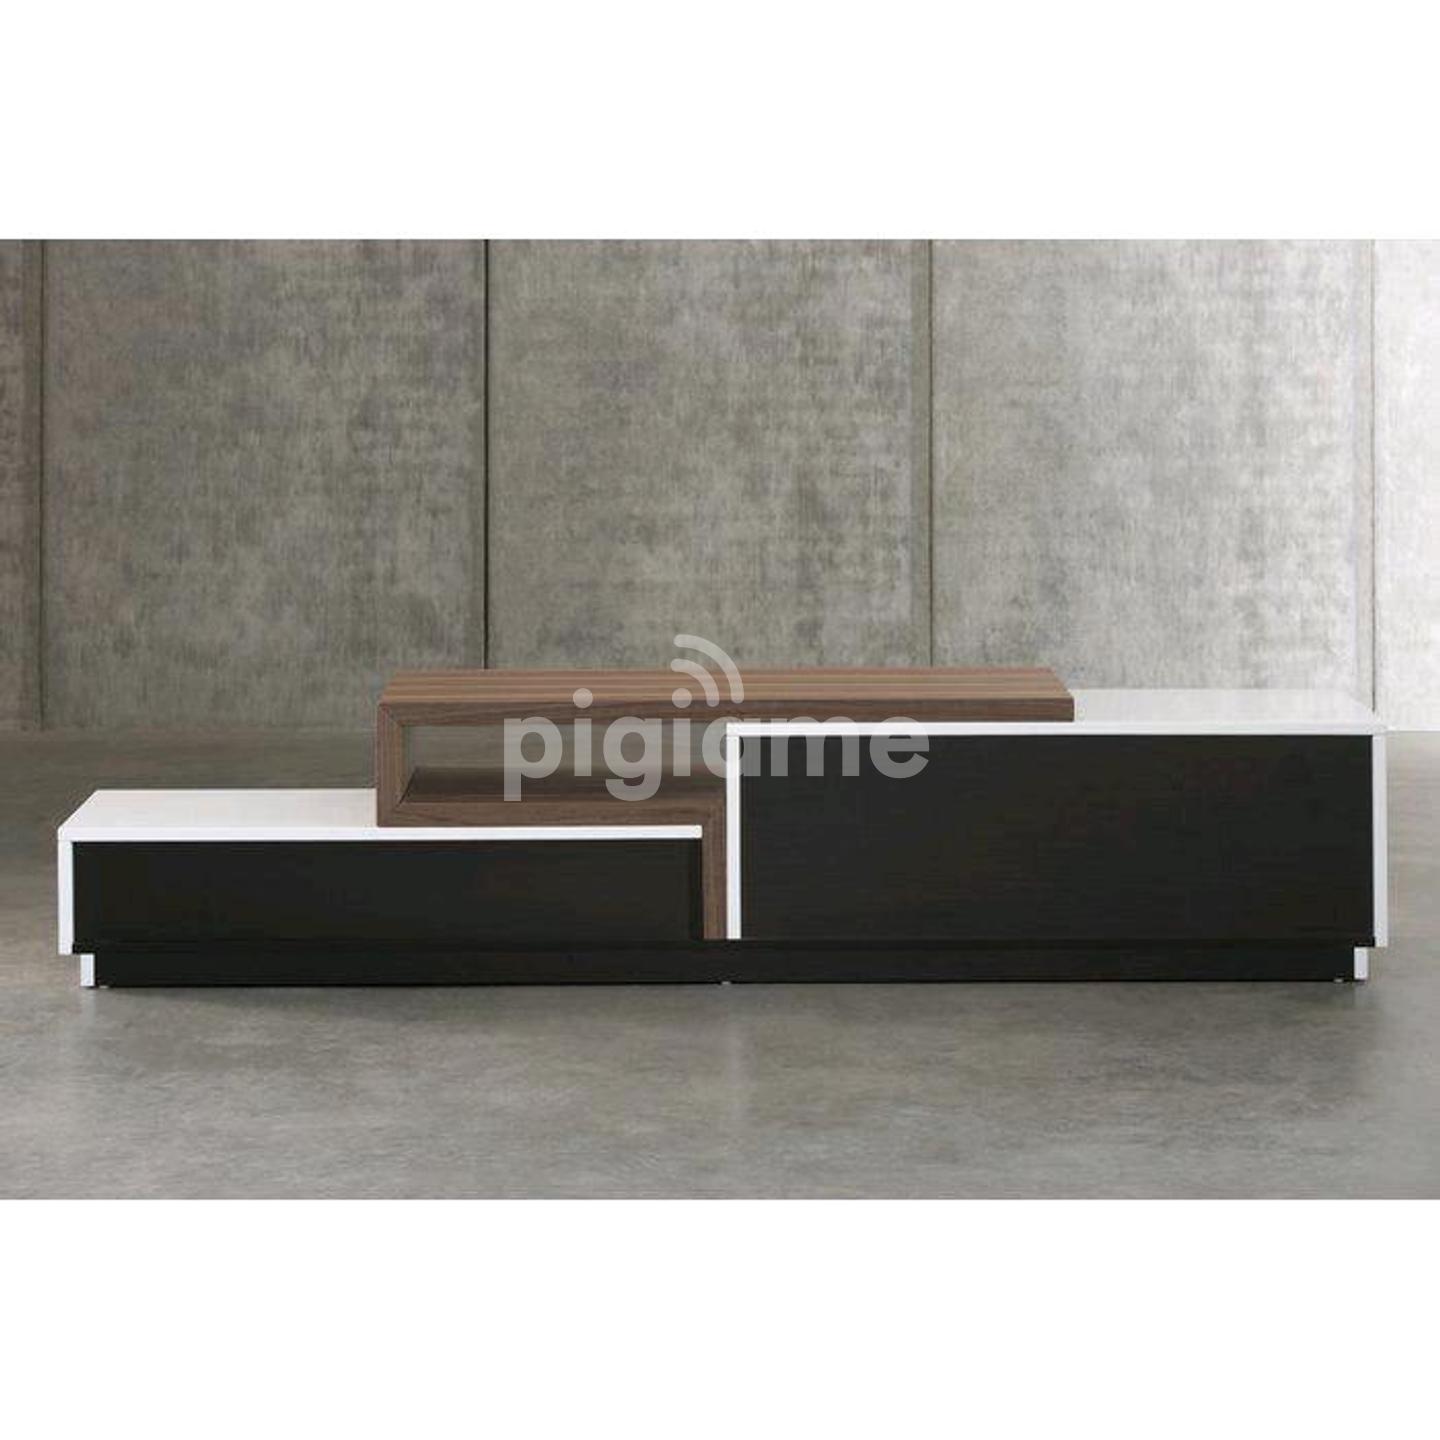 Latest tv stand designs in kenya/modern tv stand/ in ...